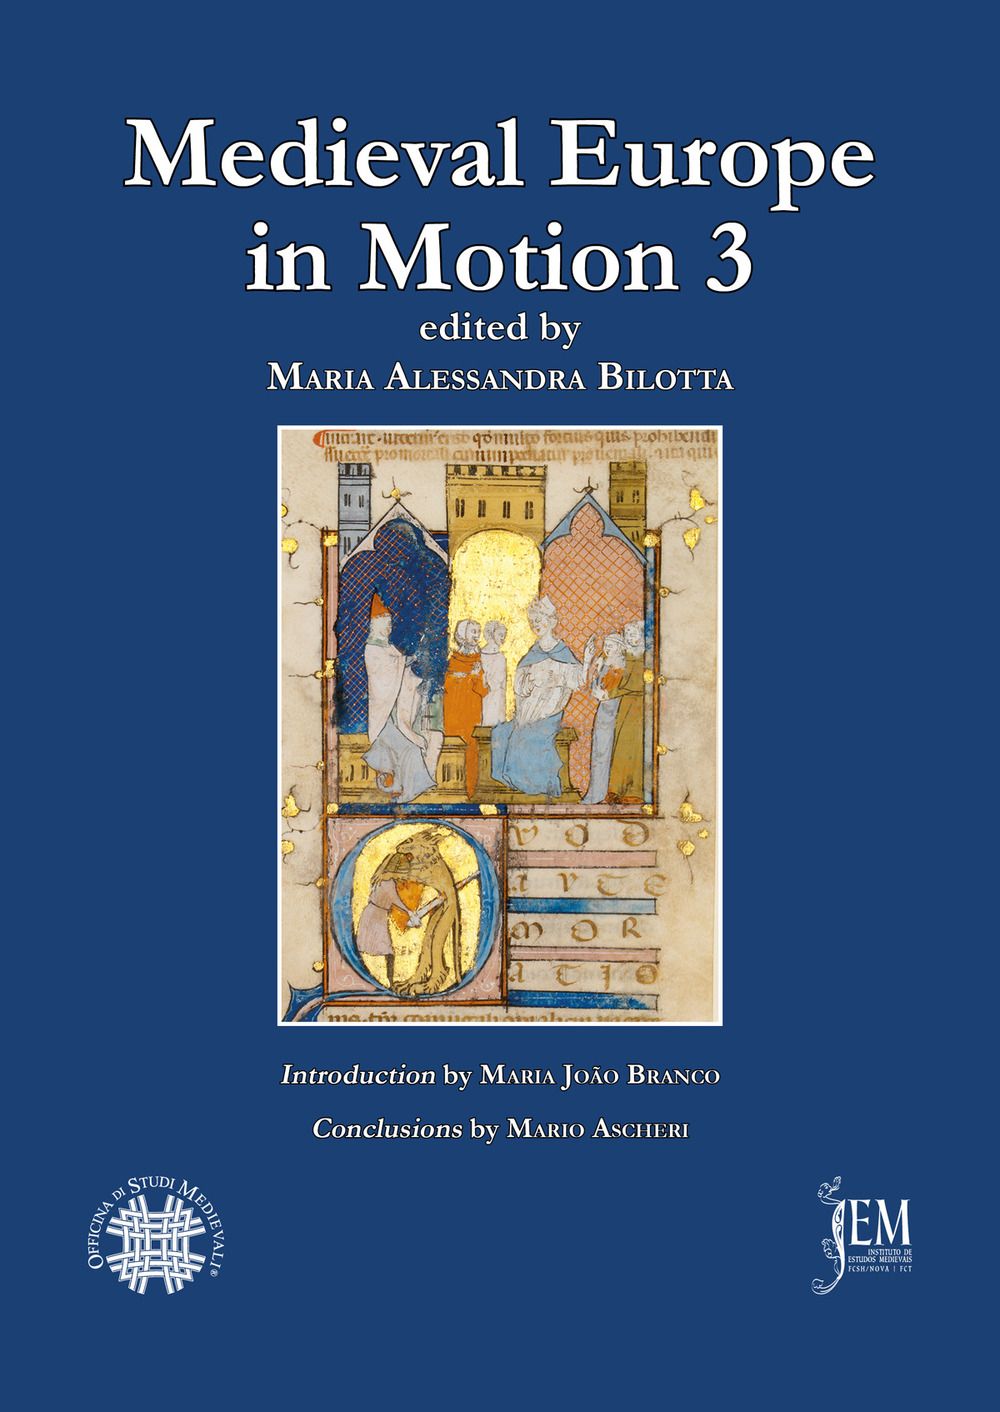 Medieval Europe in motion. The circulation of jurists, legal manuscripts and artistic, cultural and legal practices in medieval Europe (13th-15th centuries). Vol. 3